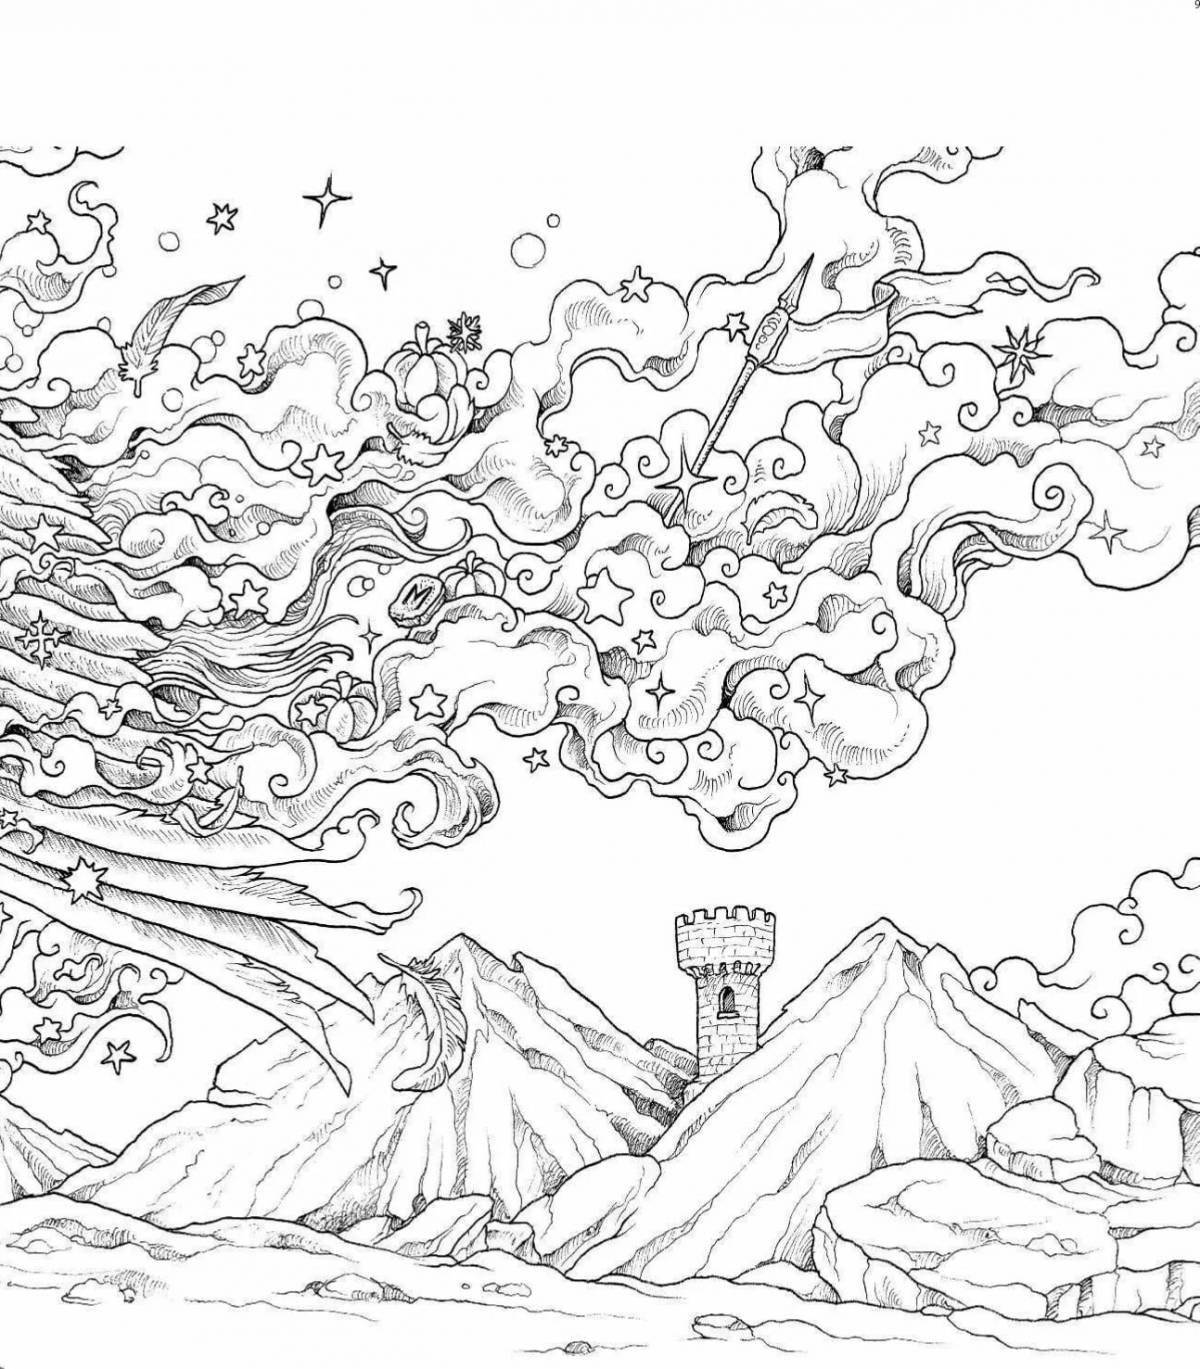 Fragile world coloring page - amazing